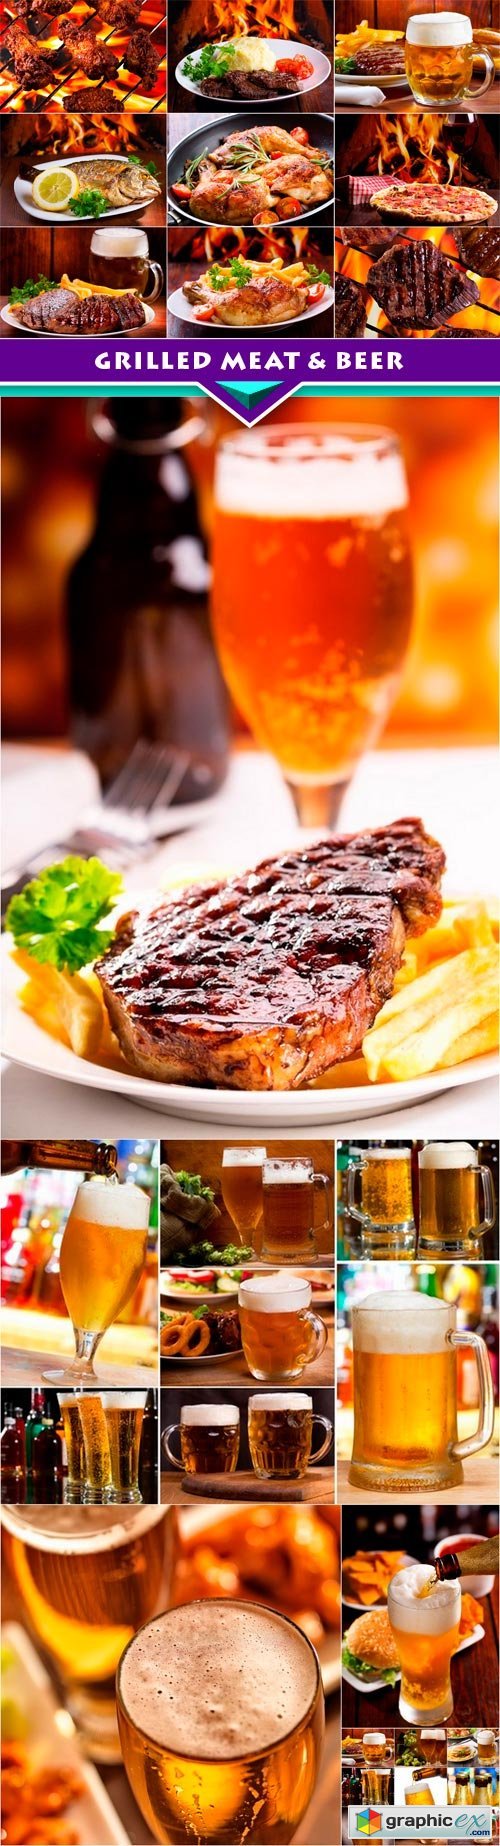 Grilled meat & beer 6x JPEG